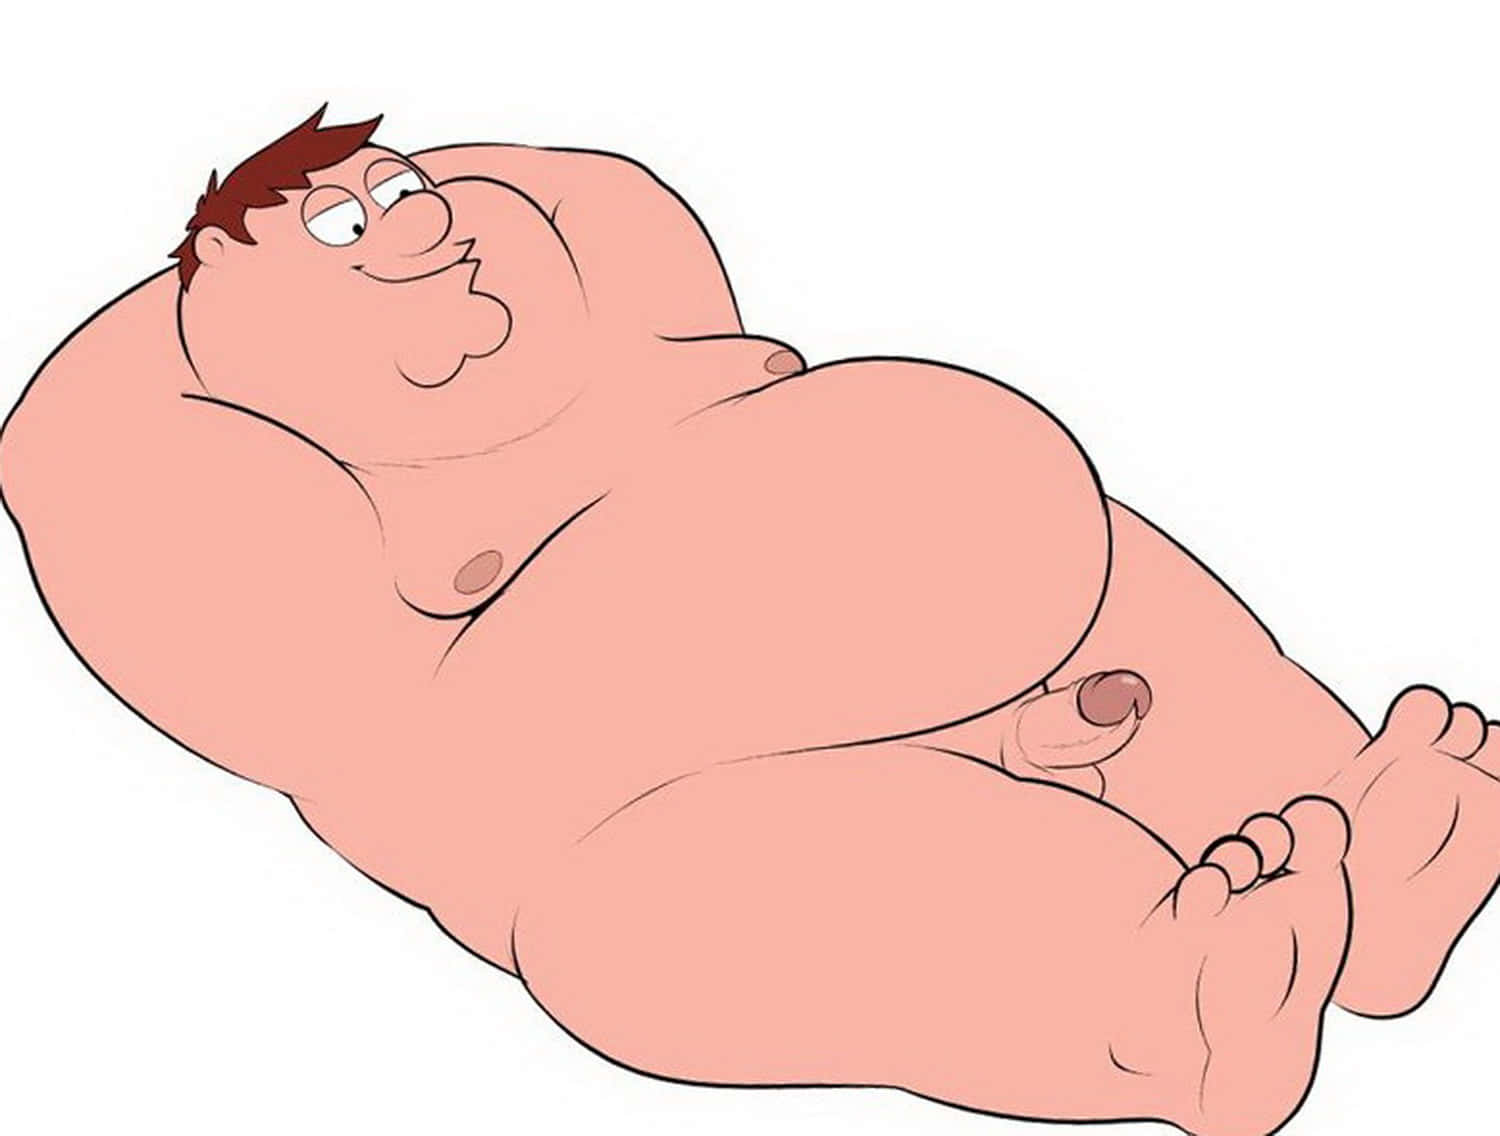 Family Guy Peter Griffin - Free XXX Pics, Hot Porn Photos and Best Sex Imag...